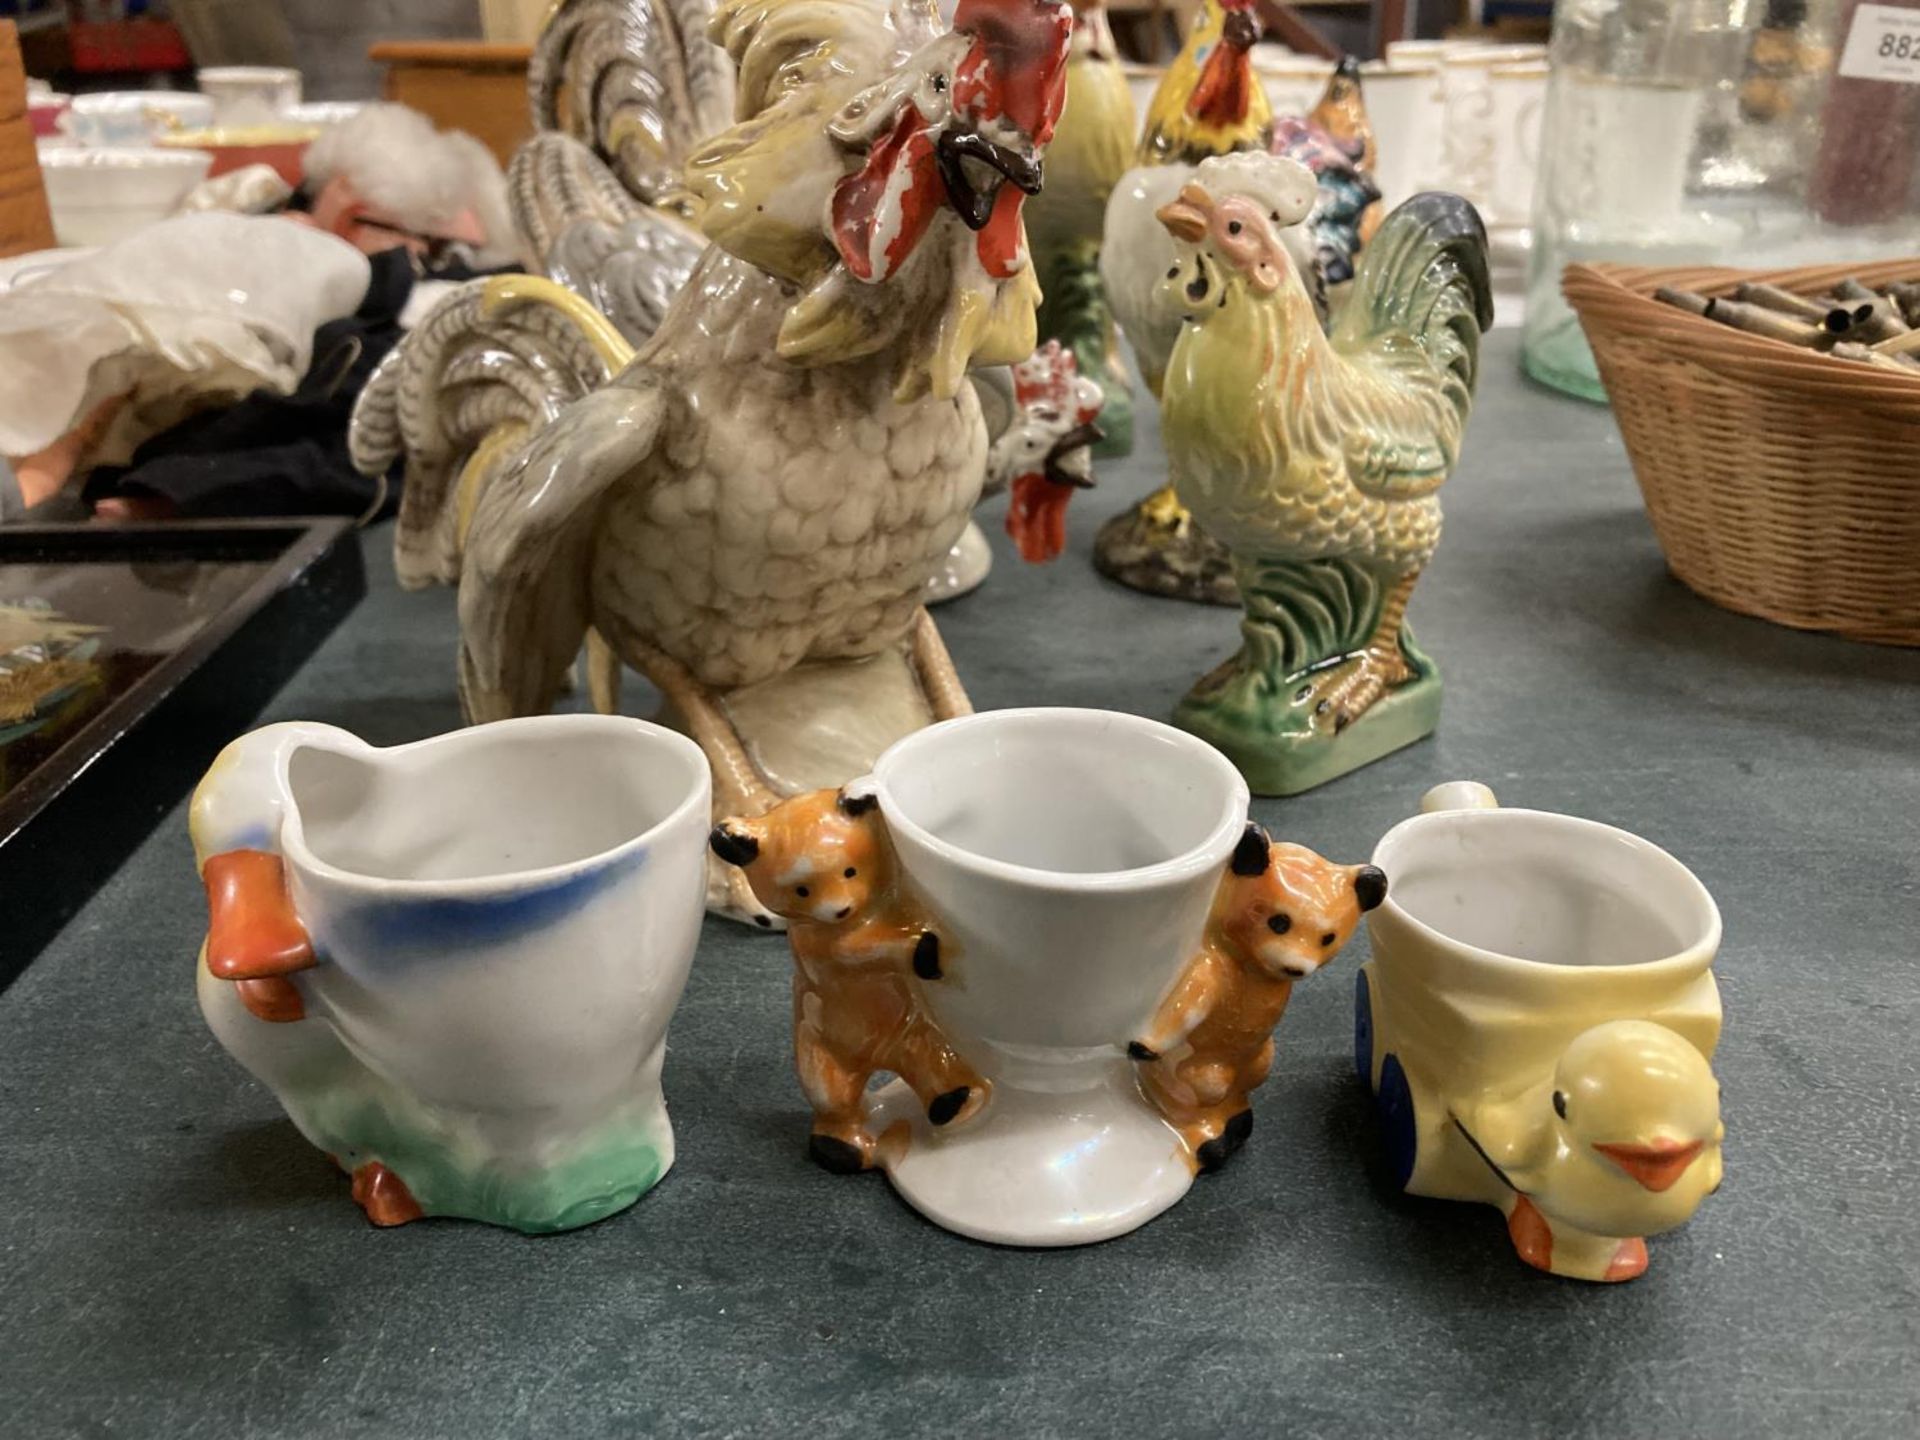 A COLLECTION OF CERAMIC ROOSTER FIGURES - Image 4 of 4